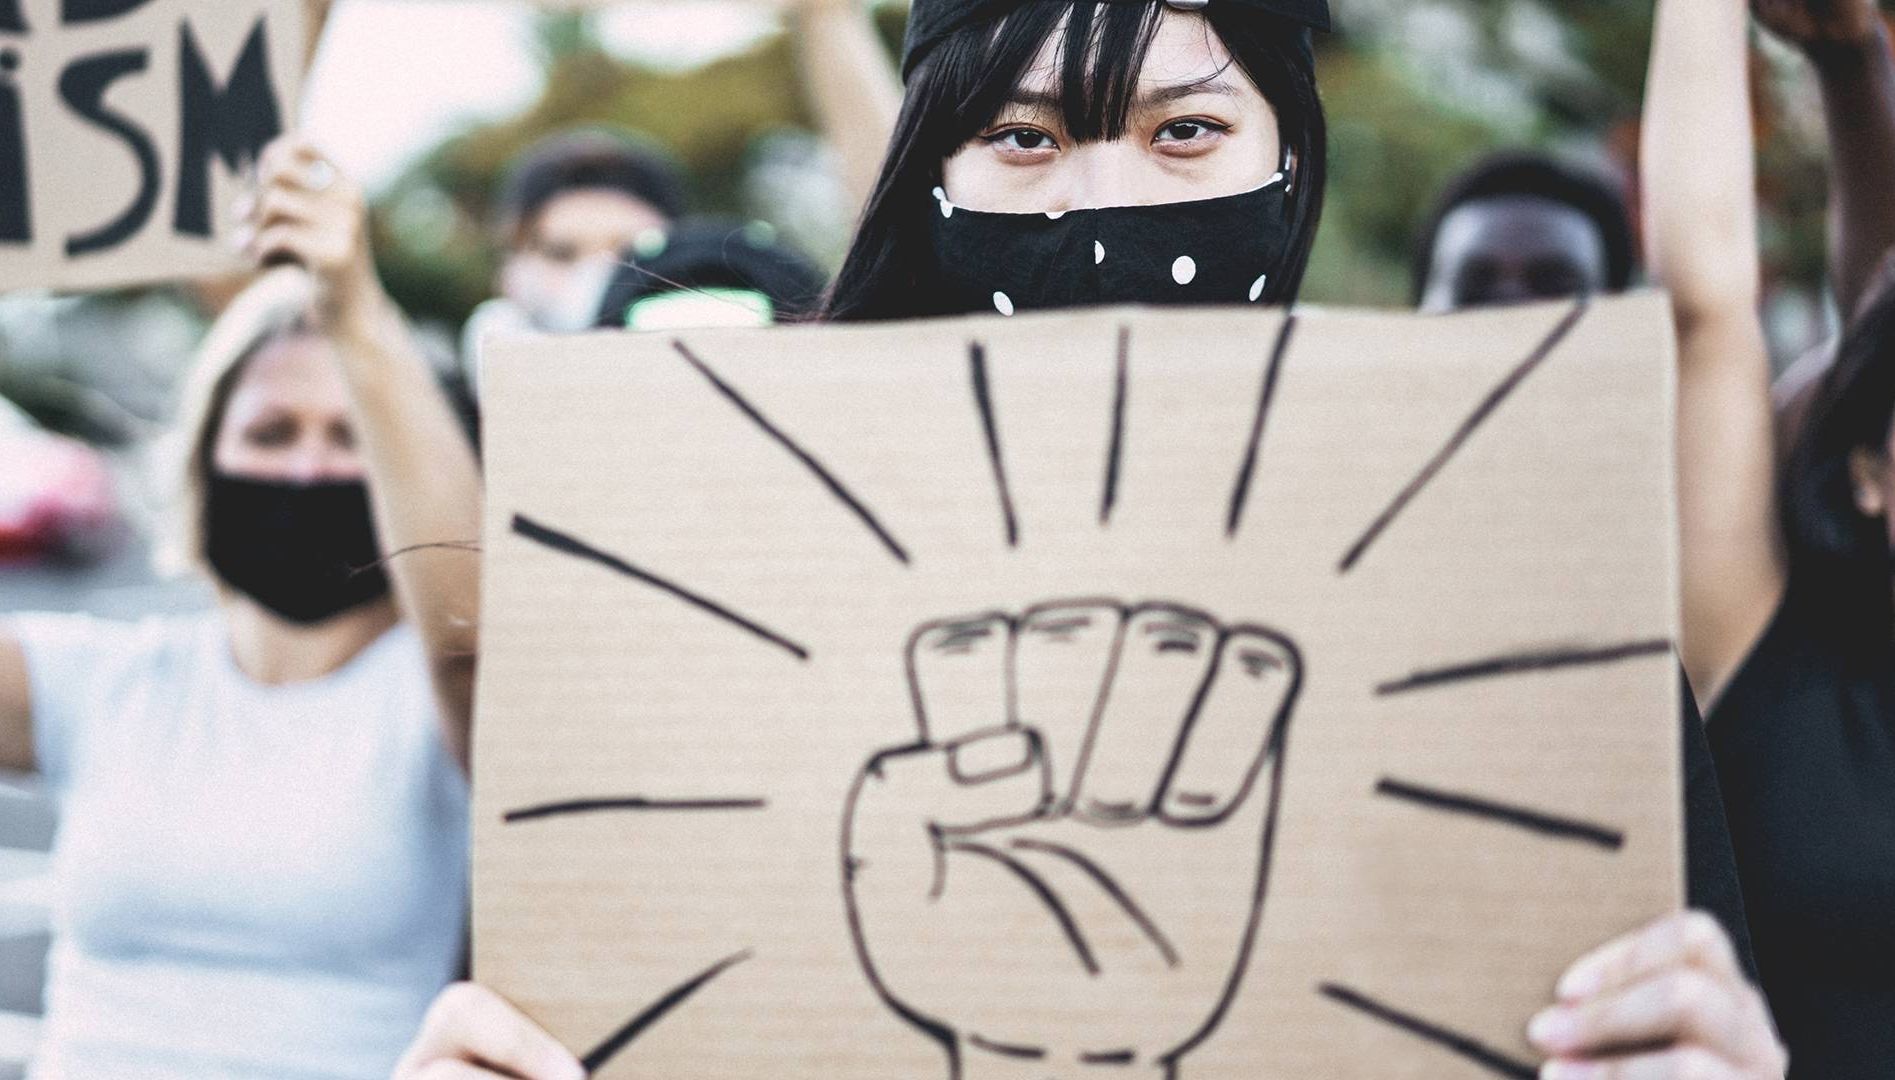 Asian girl wearing face mask while protest against racism on city street - Equal rights and demenstration concept - Focus on eyes